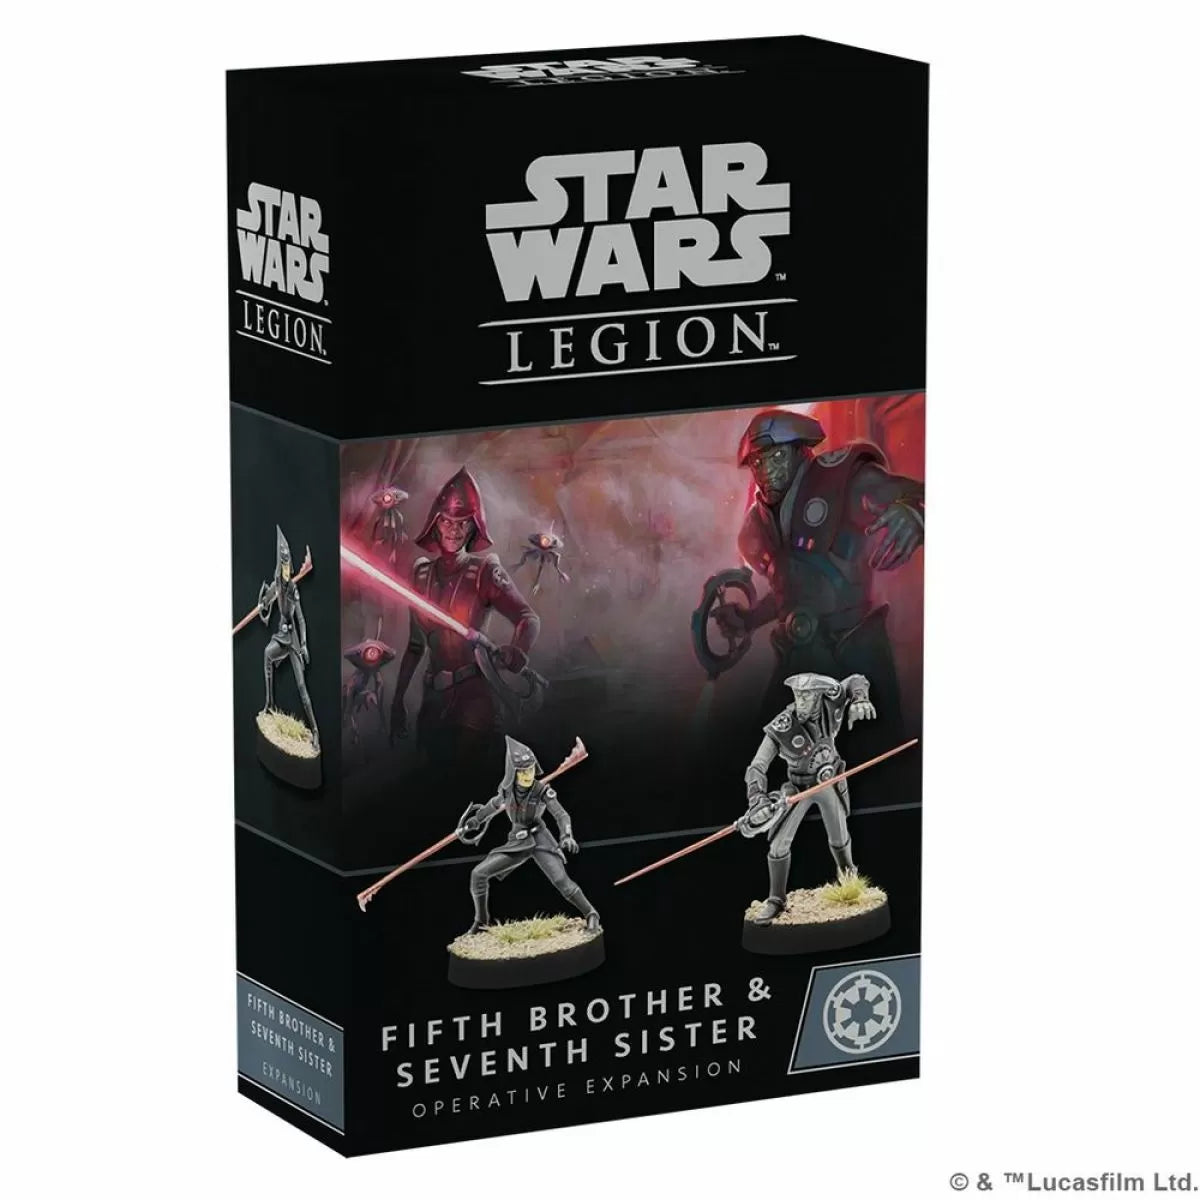 Star Wars Legion: Fifth Brother and Seventh Sister Operatice Expansion